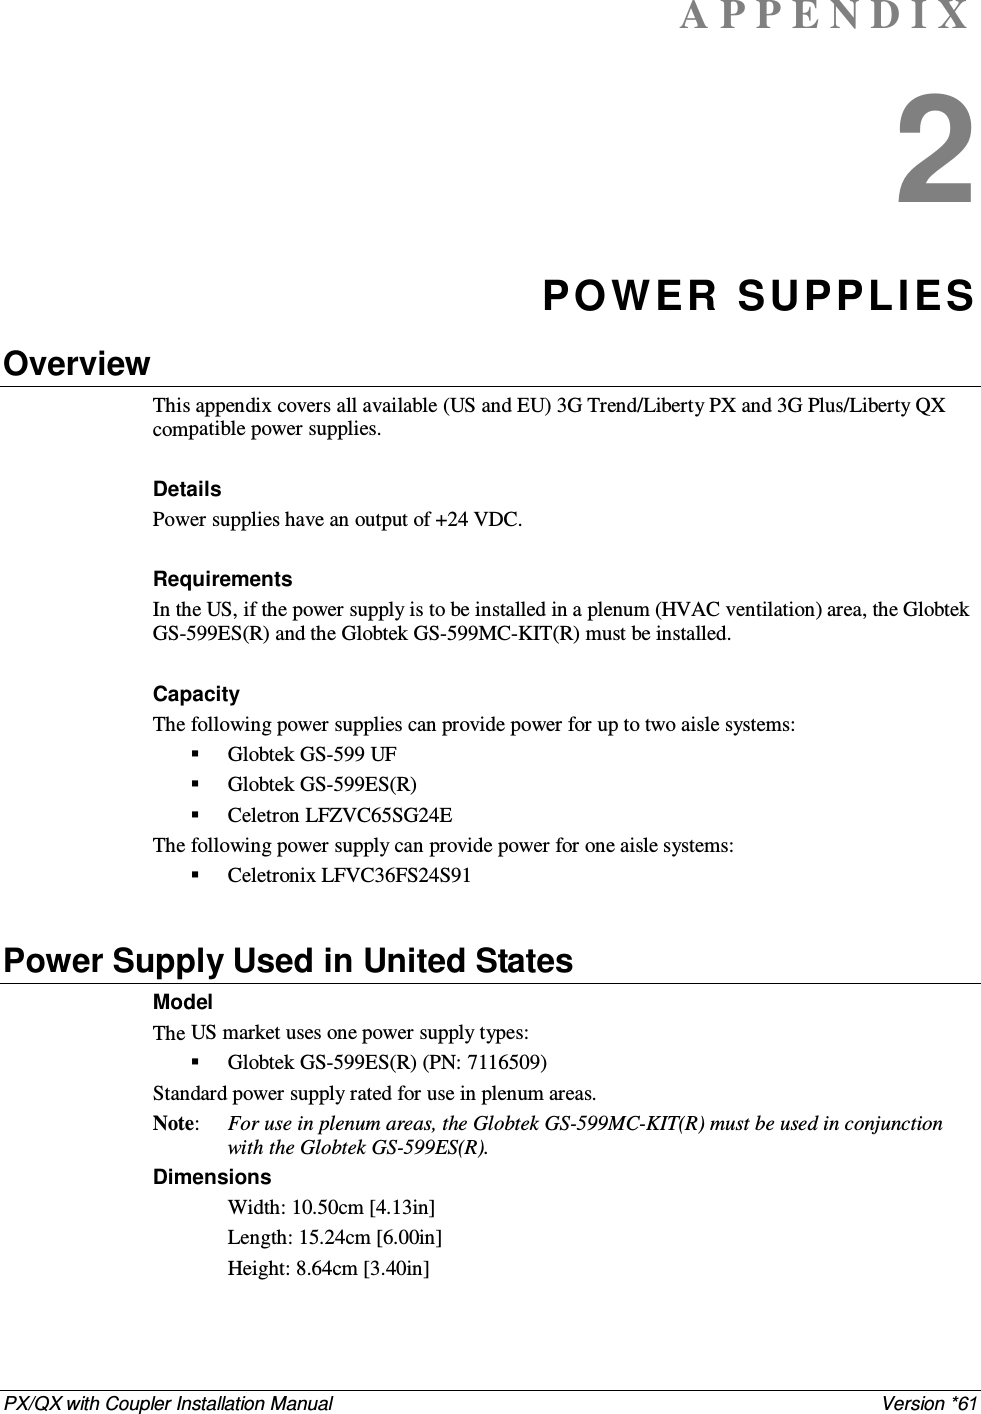 PX/QX with Coupler Installation Manual    Version *61 A P P E N D I X  2 POW ER SUPPL IES Overview This appendix covers all available (US and EU) 3G Trend/Liberty PX and 3G Plus/Liberty QX compatible power supplies.  Details Power supplies have an output of +24 VDC.  Requirements In the US, if the power supply is to be installed in a plenum (HVAC ventilation) area, the Globtek GS-599ES(R) and the Globtek GS-599MC-KIT(R) must be installed.  Capacity The following power supplies can provide power for up to two aisle systems:  Globtek GS-599 UF  Globtek GS-599ES(R)  Celetron LFZVC65SG24E The following power supply can provide power for one aisle systems:  Celetronix LFVC36FS24S91  Power Supply Used in United States Model  The US market uses one power supply types:  Globtek GS-599ES(R) (PN: 7116509) Standard power supply rated for use in plenum areas.  Note:   For use in plenum areas, the Globtek GS-599MC-KIT(R) must be used in conjunction with the Globtek GS-599ES(R).  Dimensions  Width: 10.50cm [4.13in]  Length: 15.24cm [6.00in]  Height: 8.64cm [3.40in]   